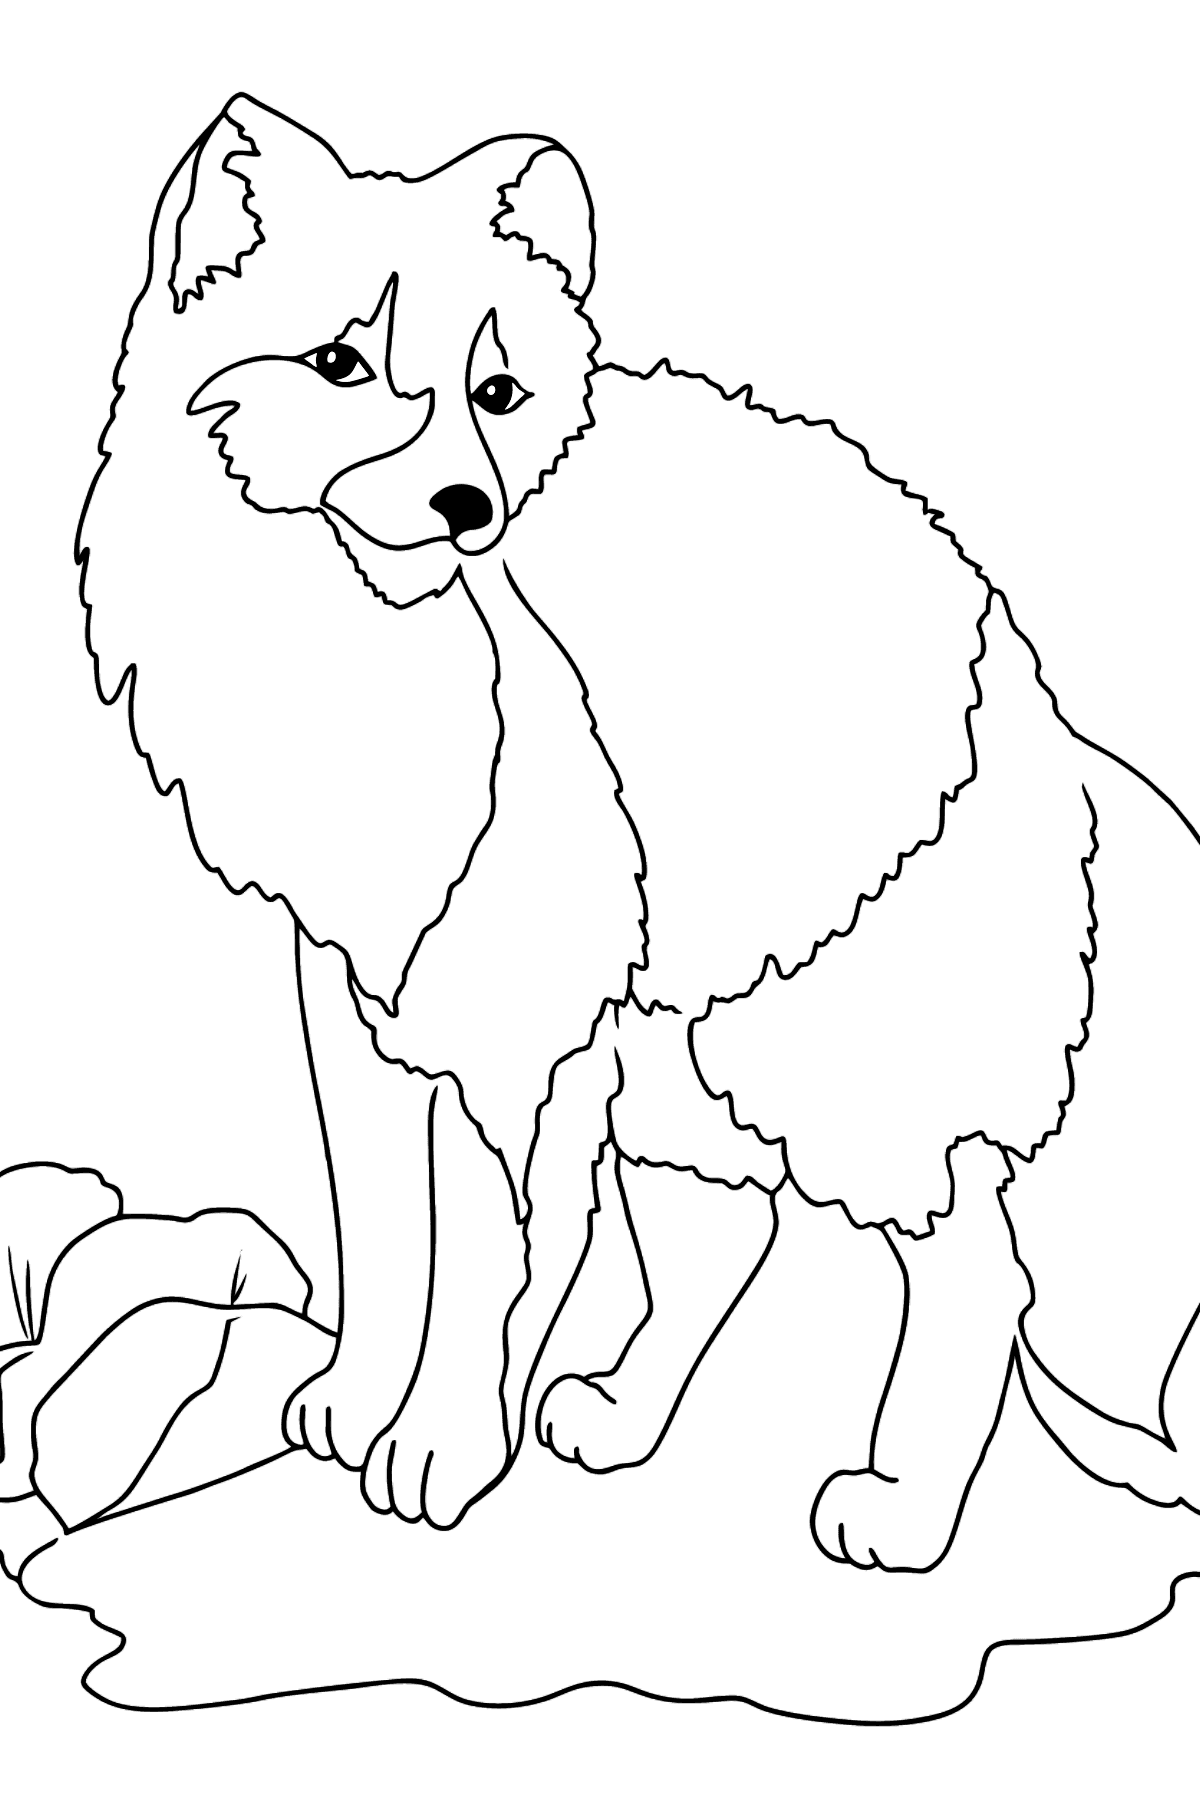 Coloring Page - A Polar Fox on a Hunt - Coloring Pages for Kids